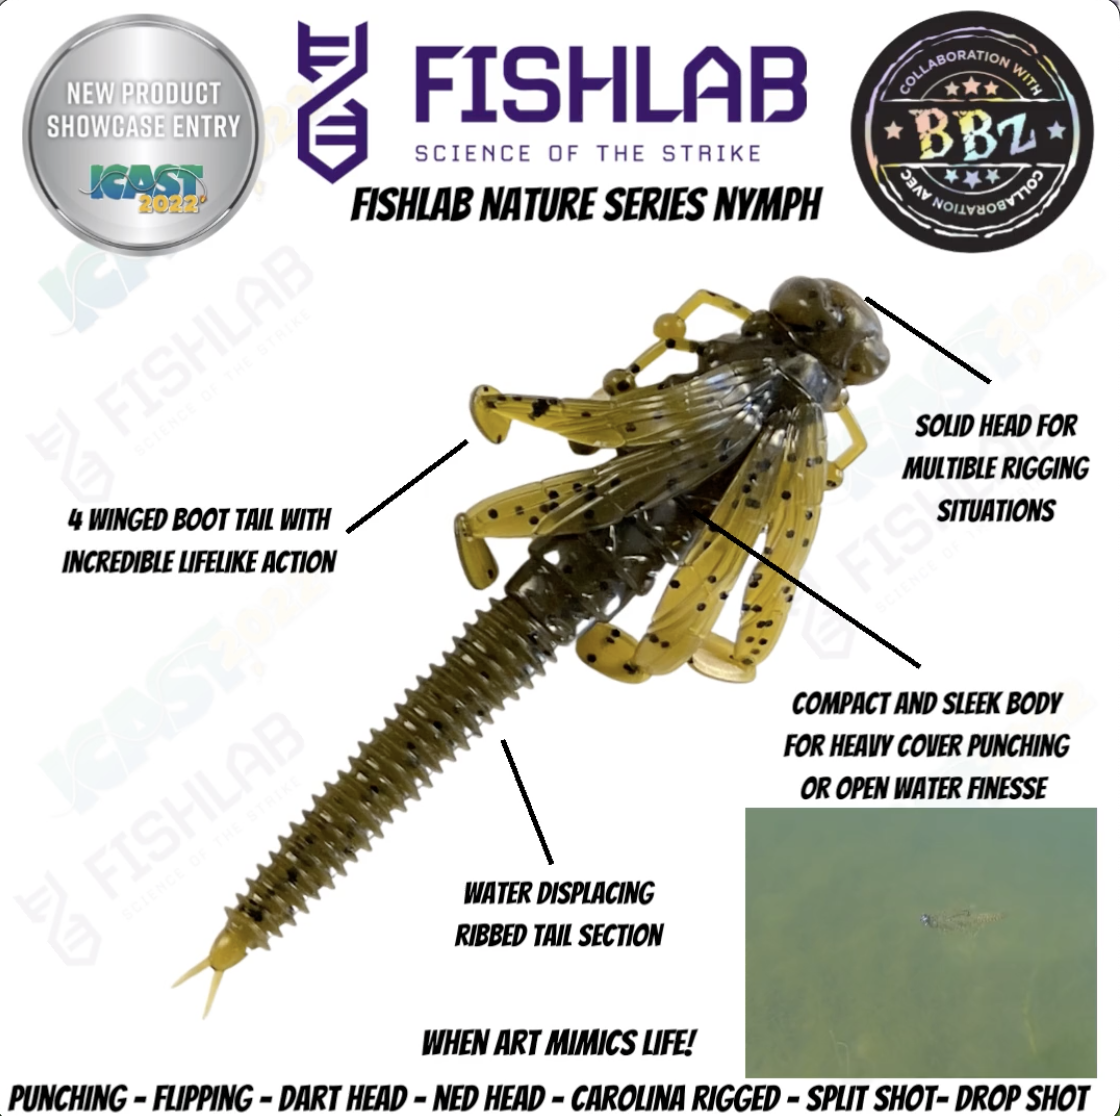 Here Is A Closer Look At The New FishLab Nature Series Nymph